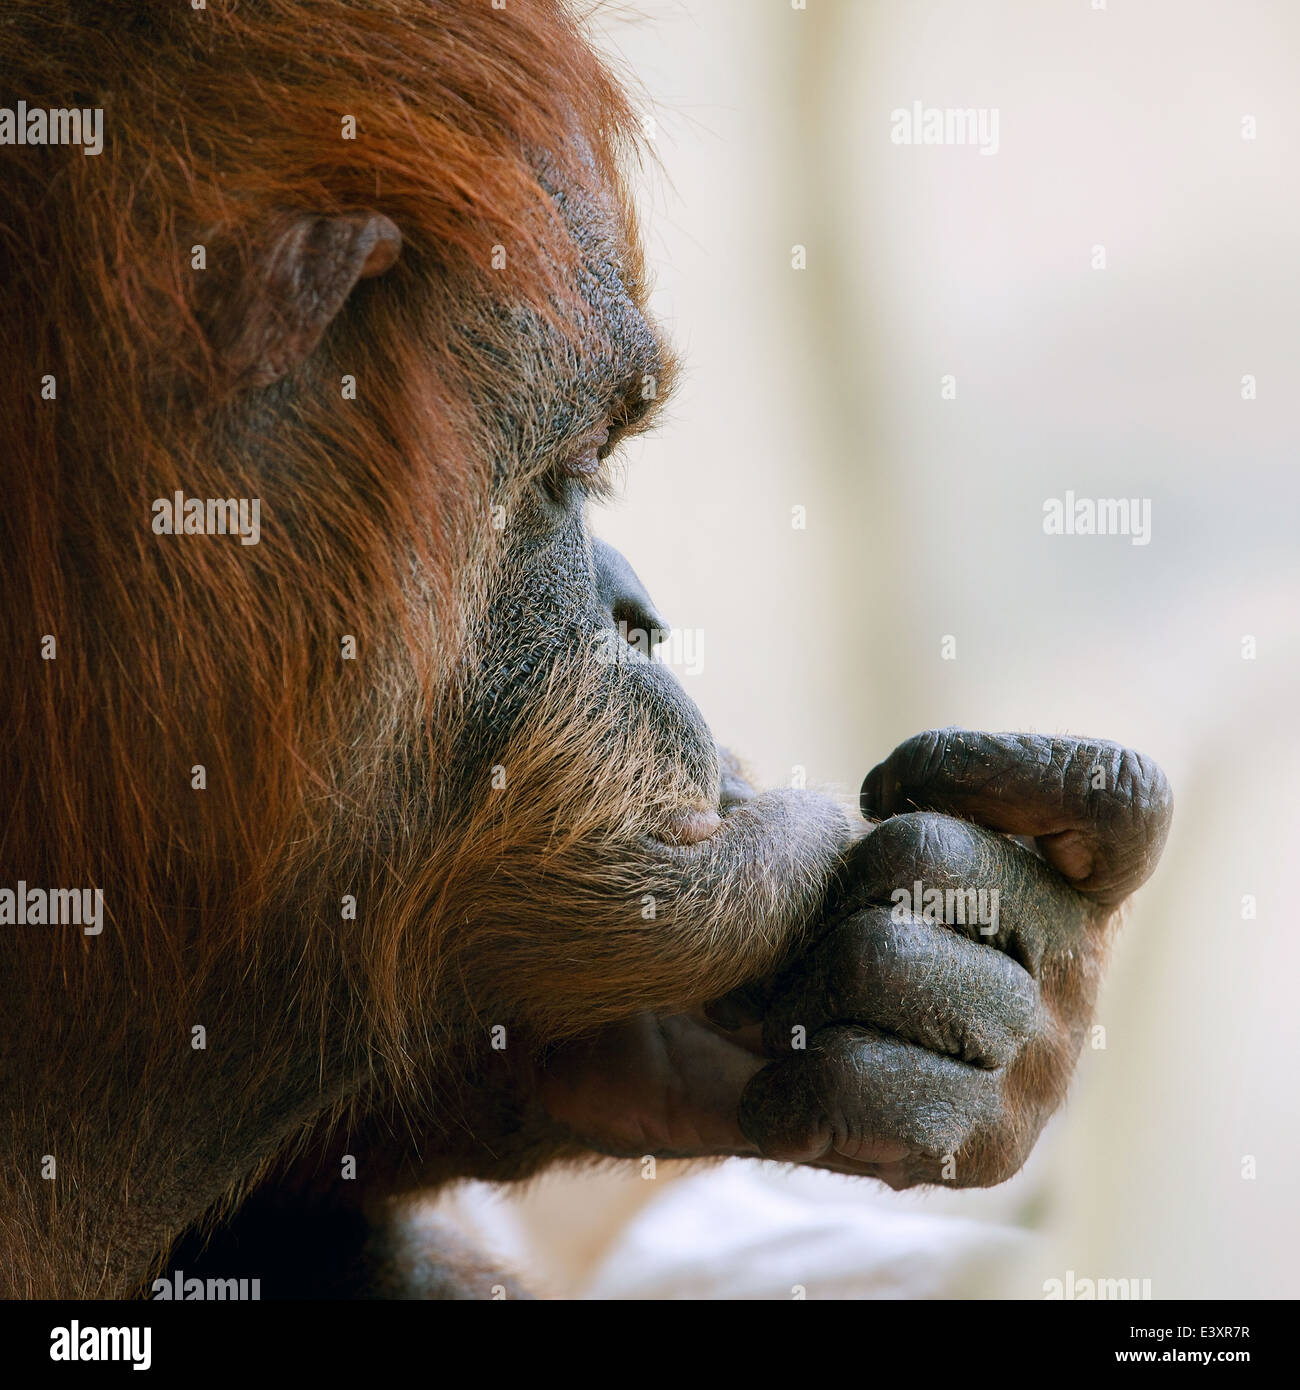 Endangered Orangutan with hand on face portrait in indonesia. Stock Photo